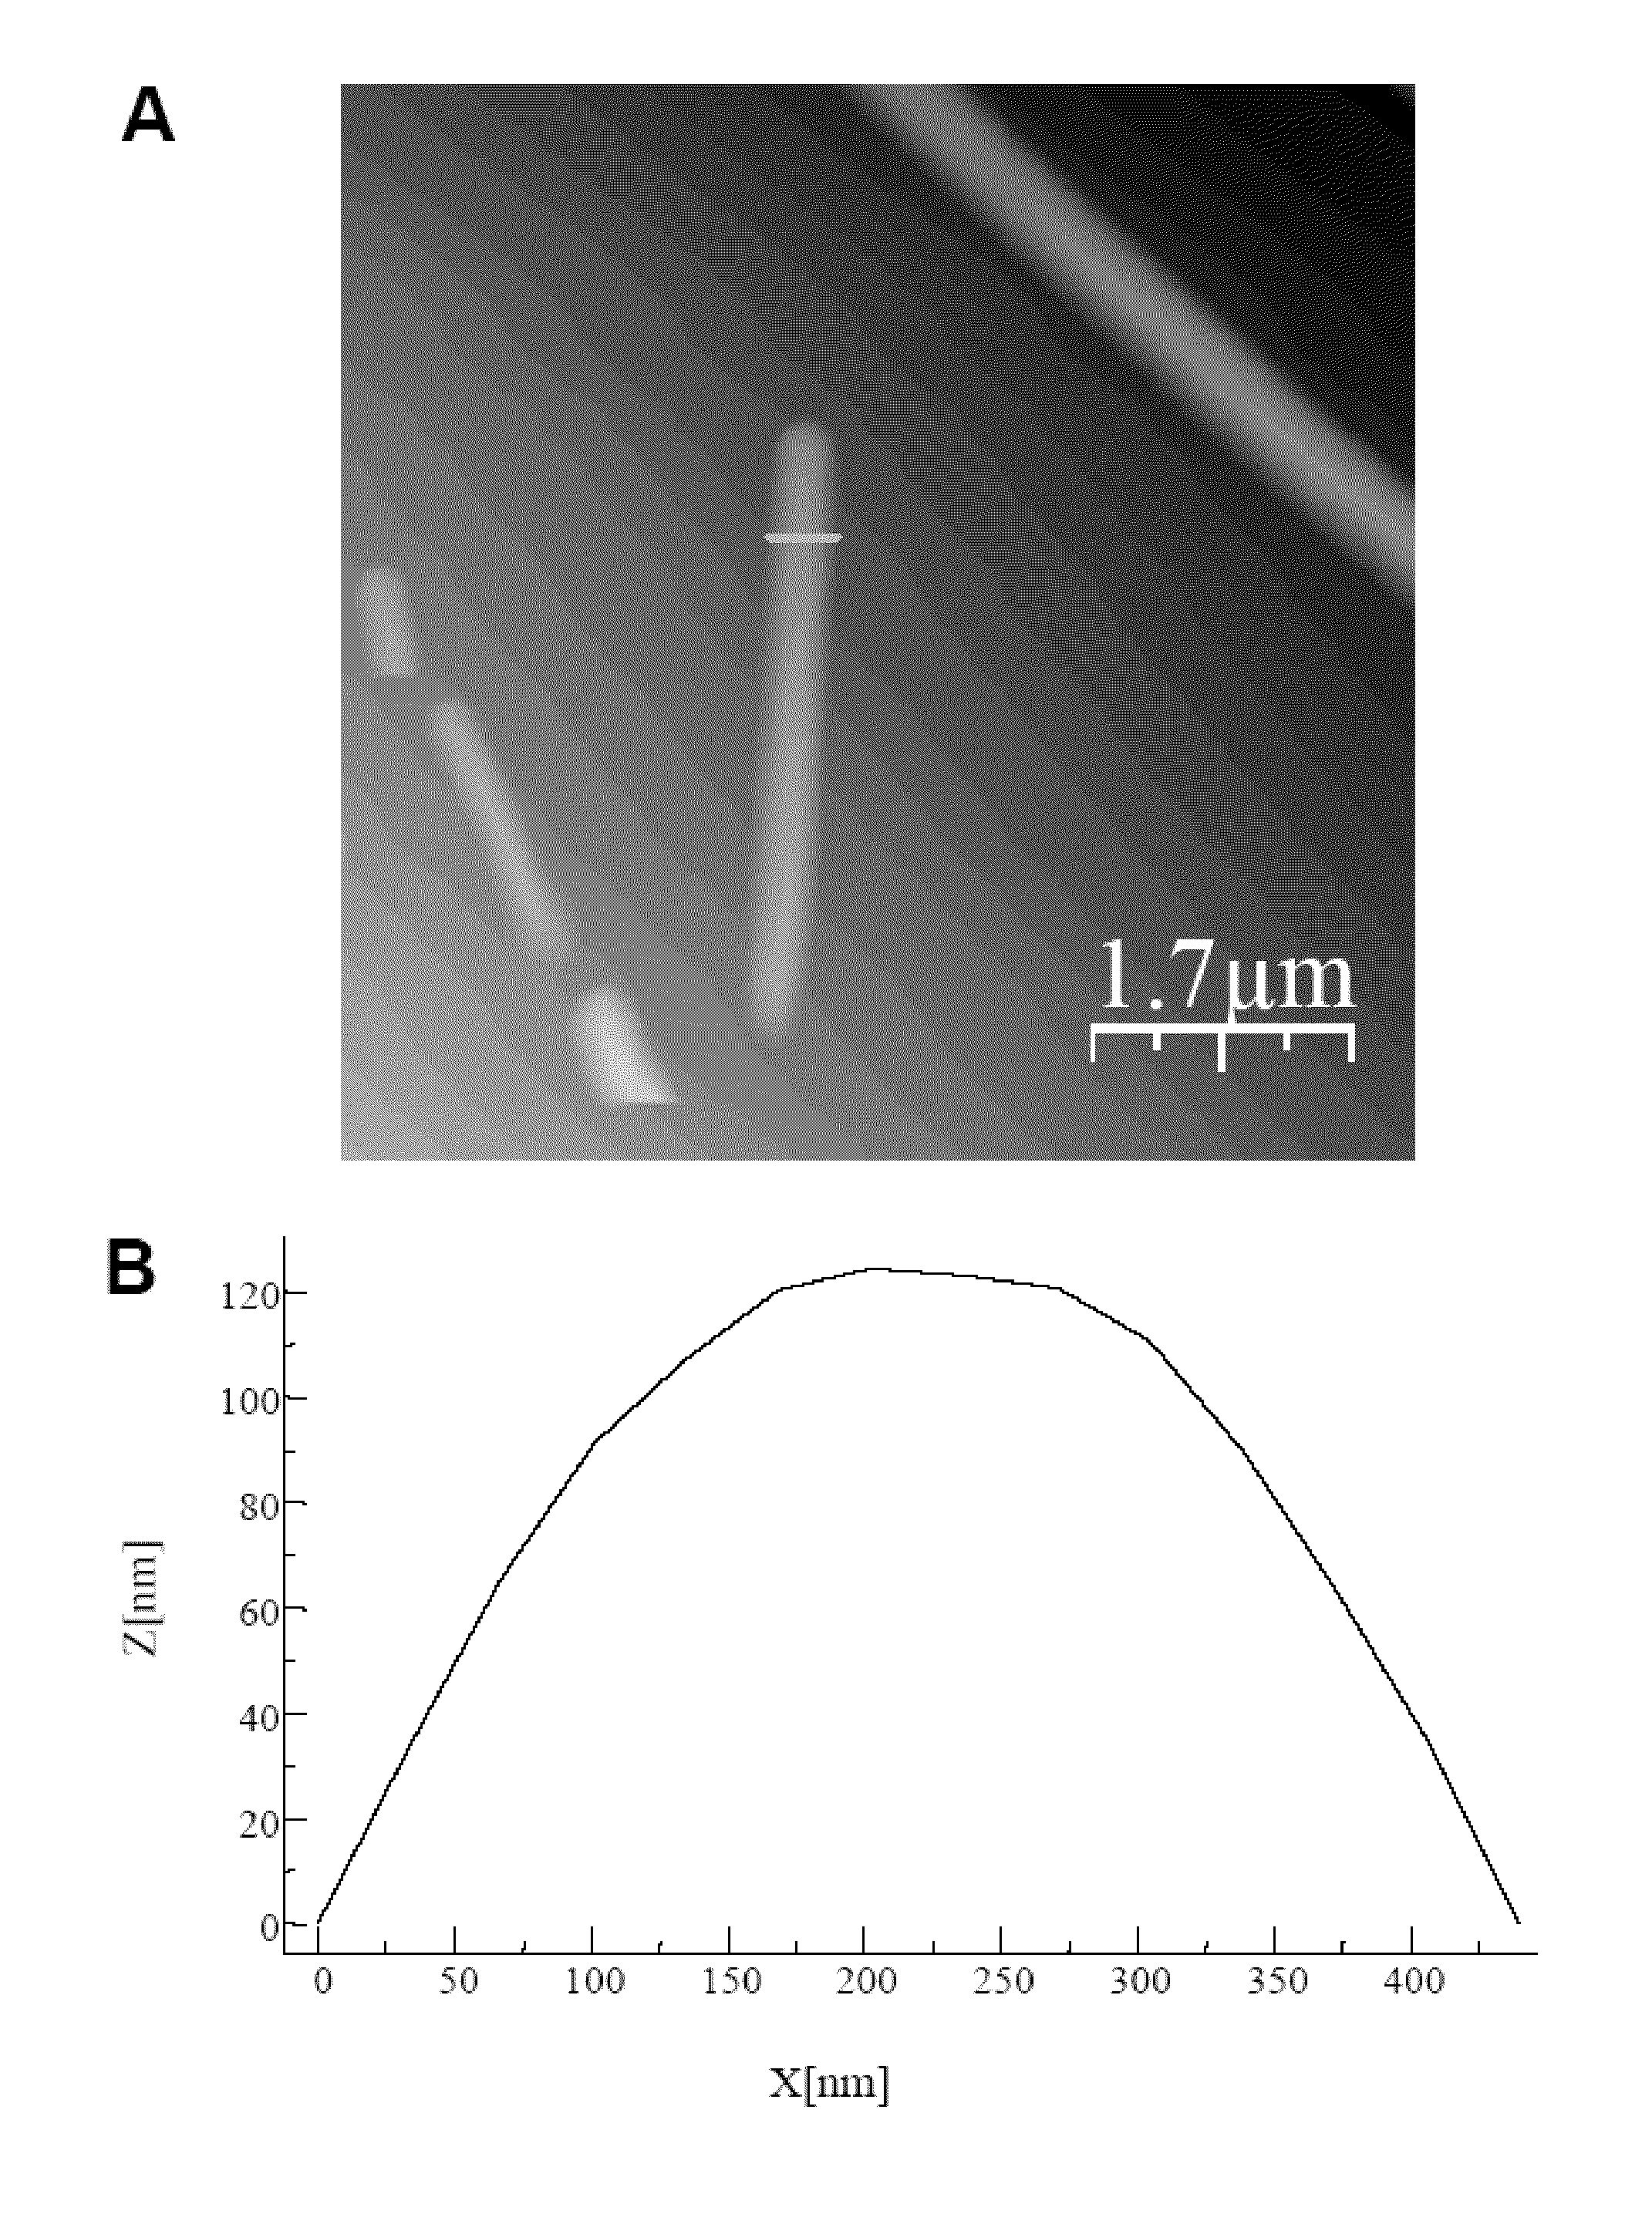 Peptide nanostructures containing end-capping modified peptides and methods of generating and using the same